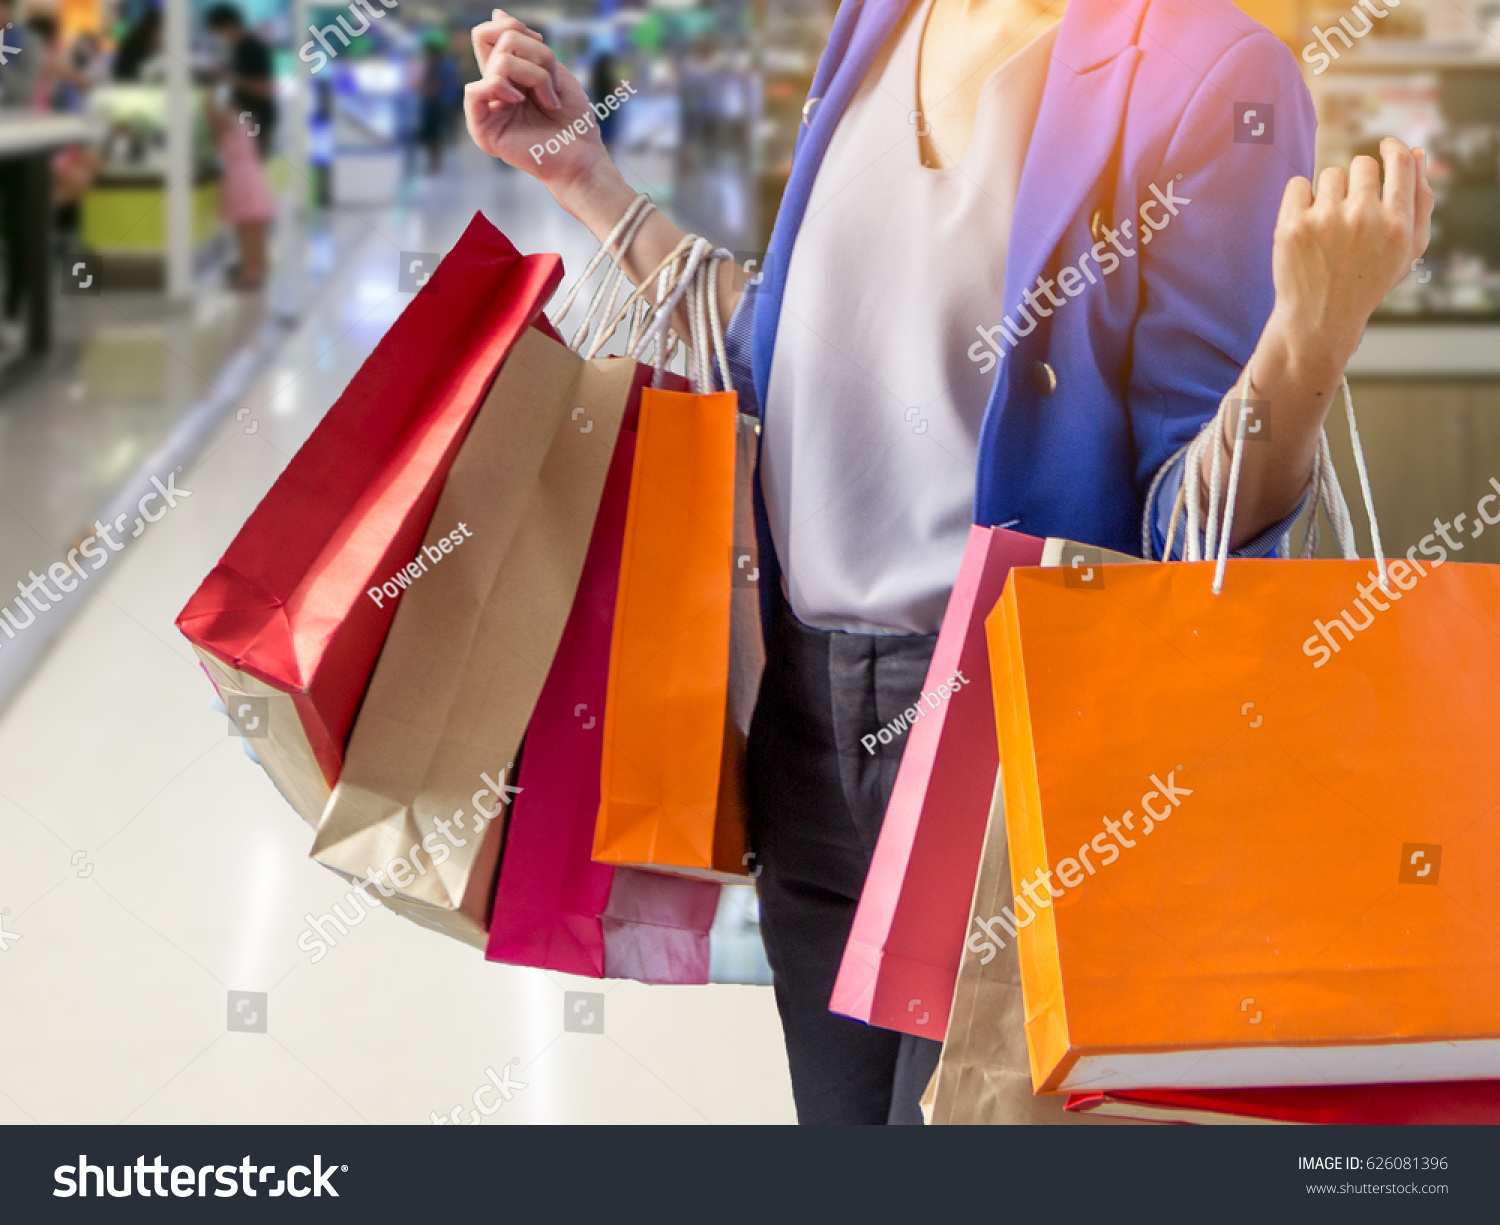 woman holding shopping bag in mall
 #626081396